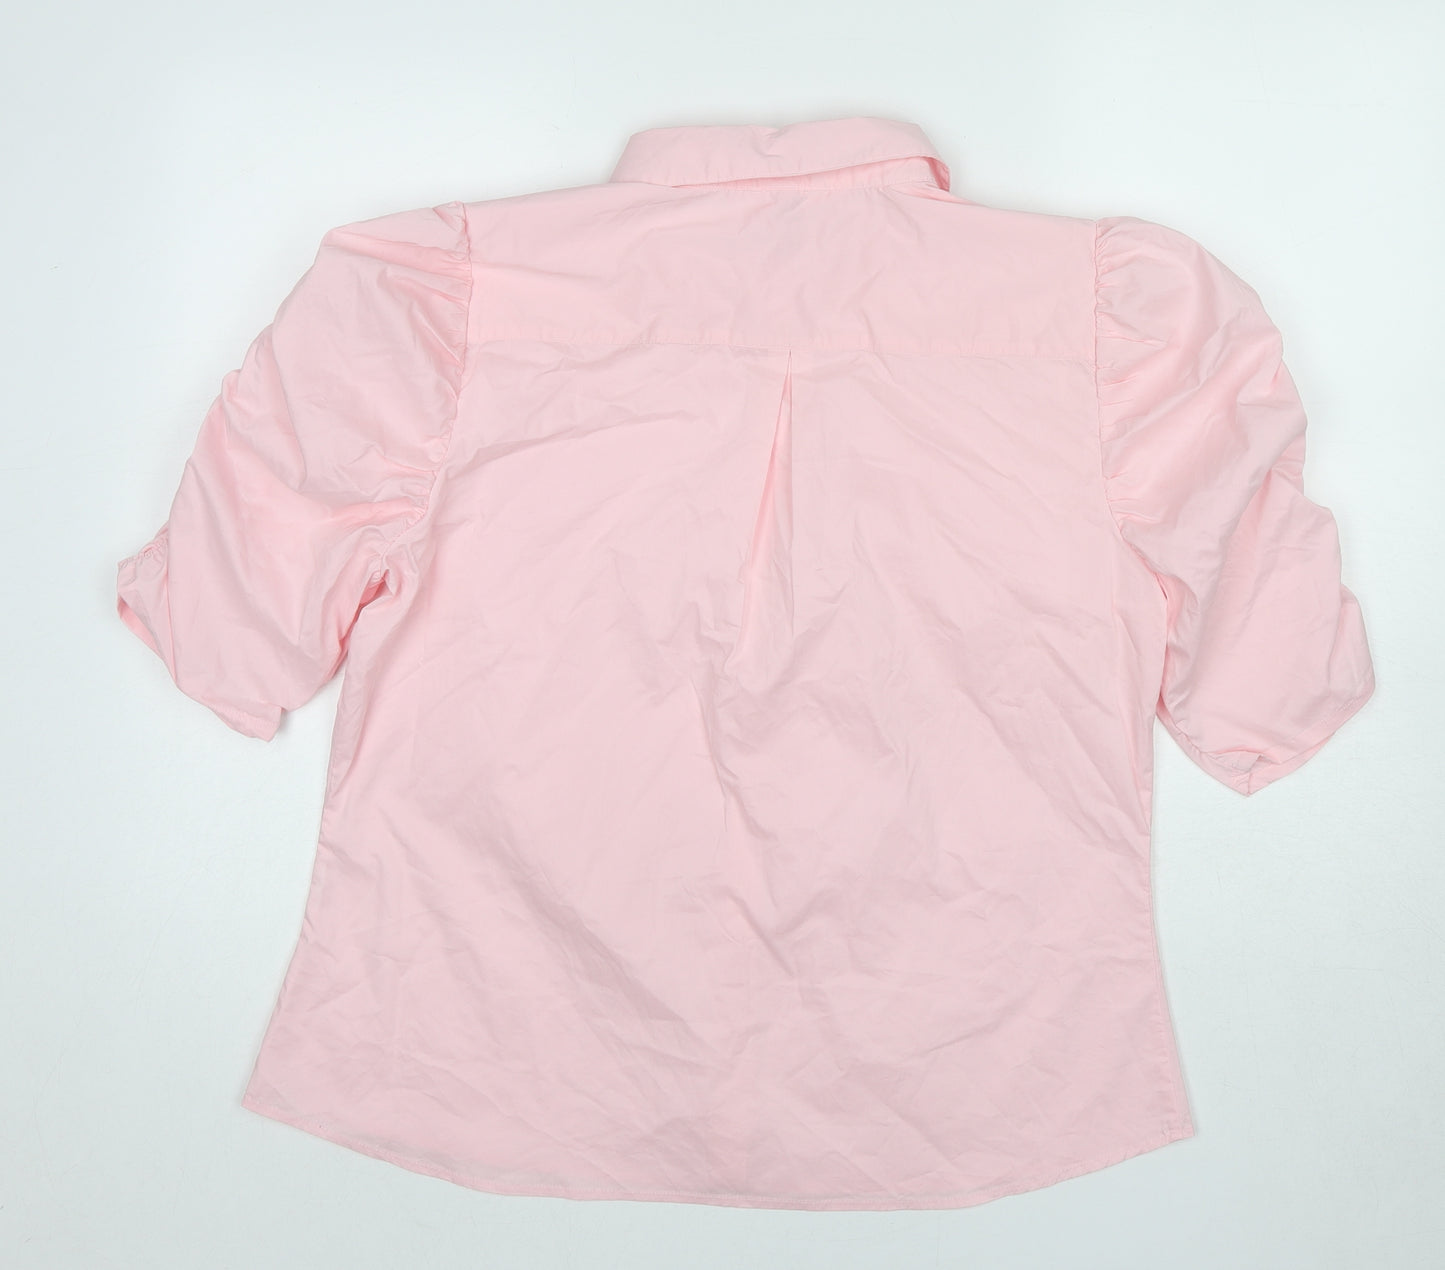 CULTURE Womens Pink Polyester Basic Button-Up Size XL Collared